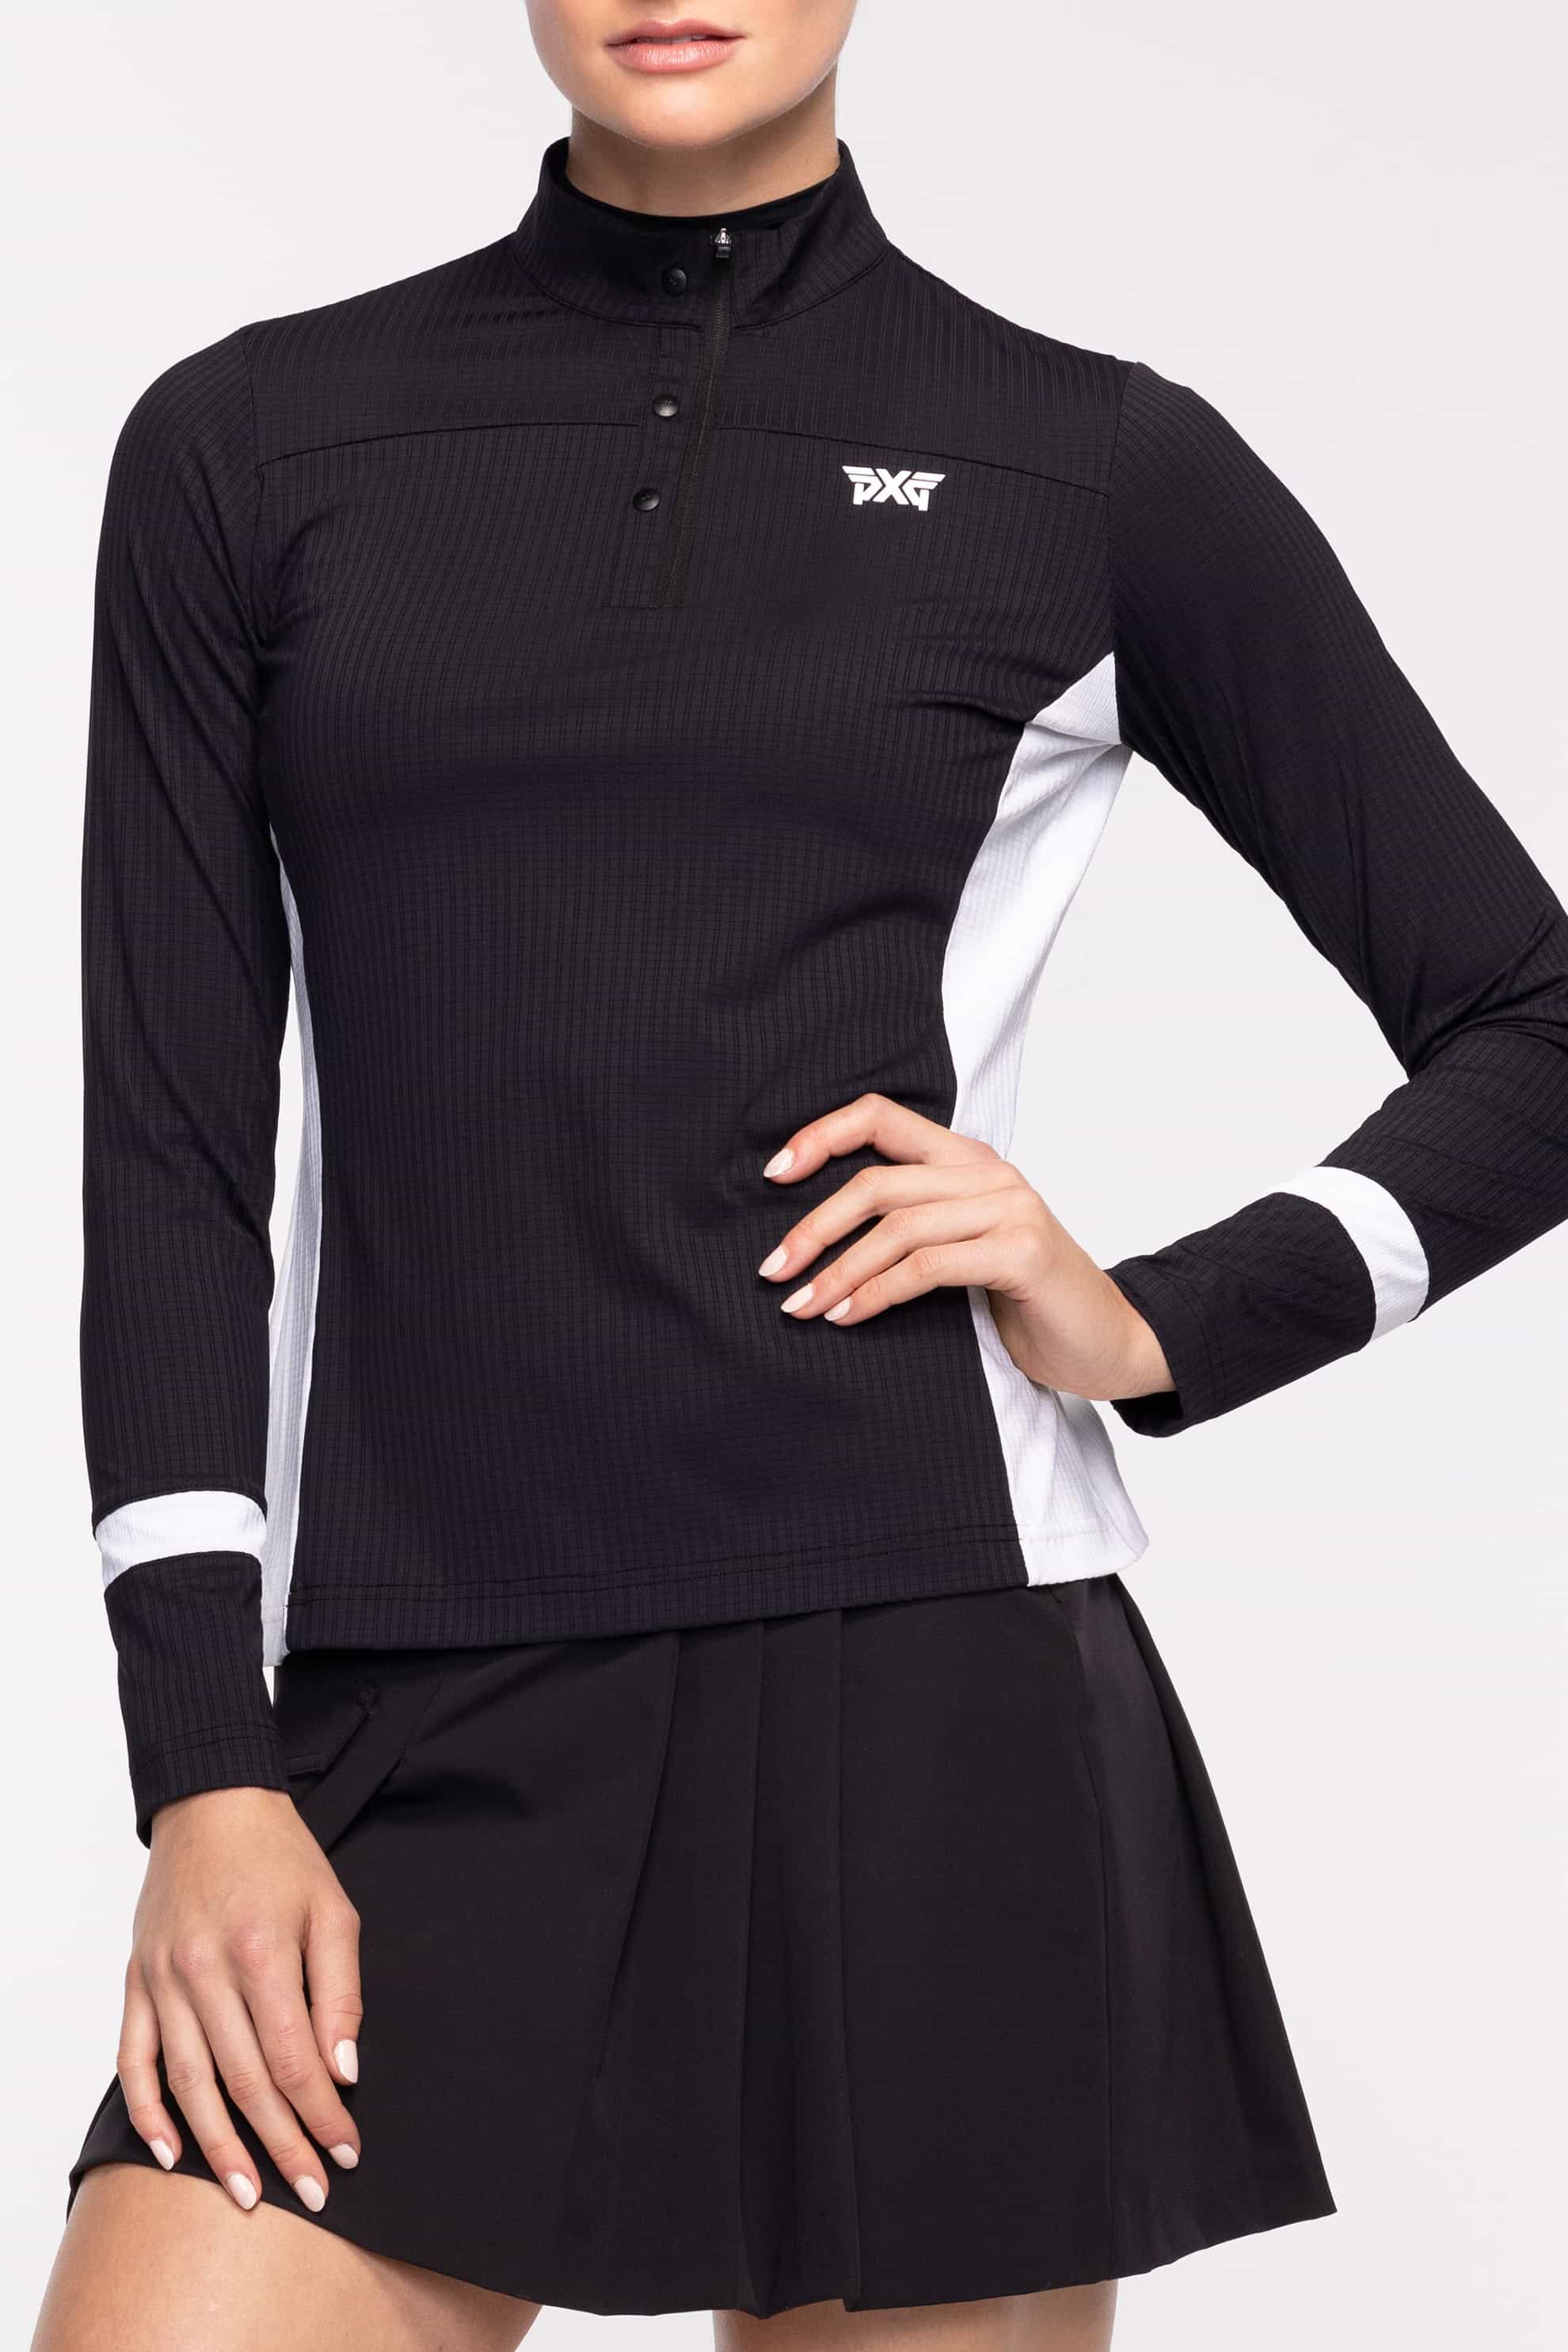 PXG Women's Golf Apparel: Discover the Latest in Golf Fashion 